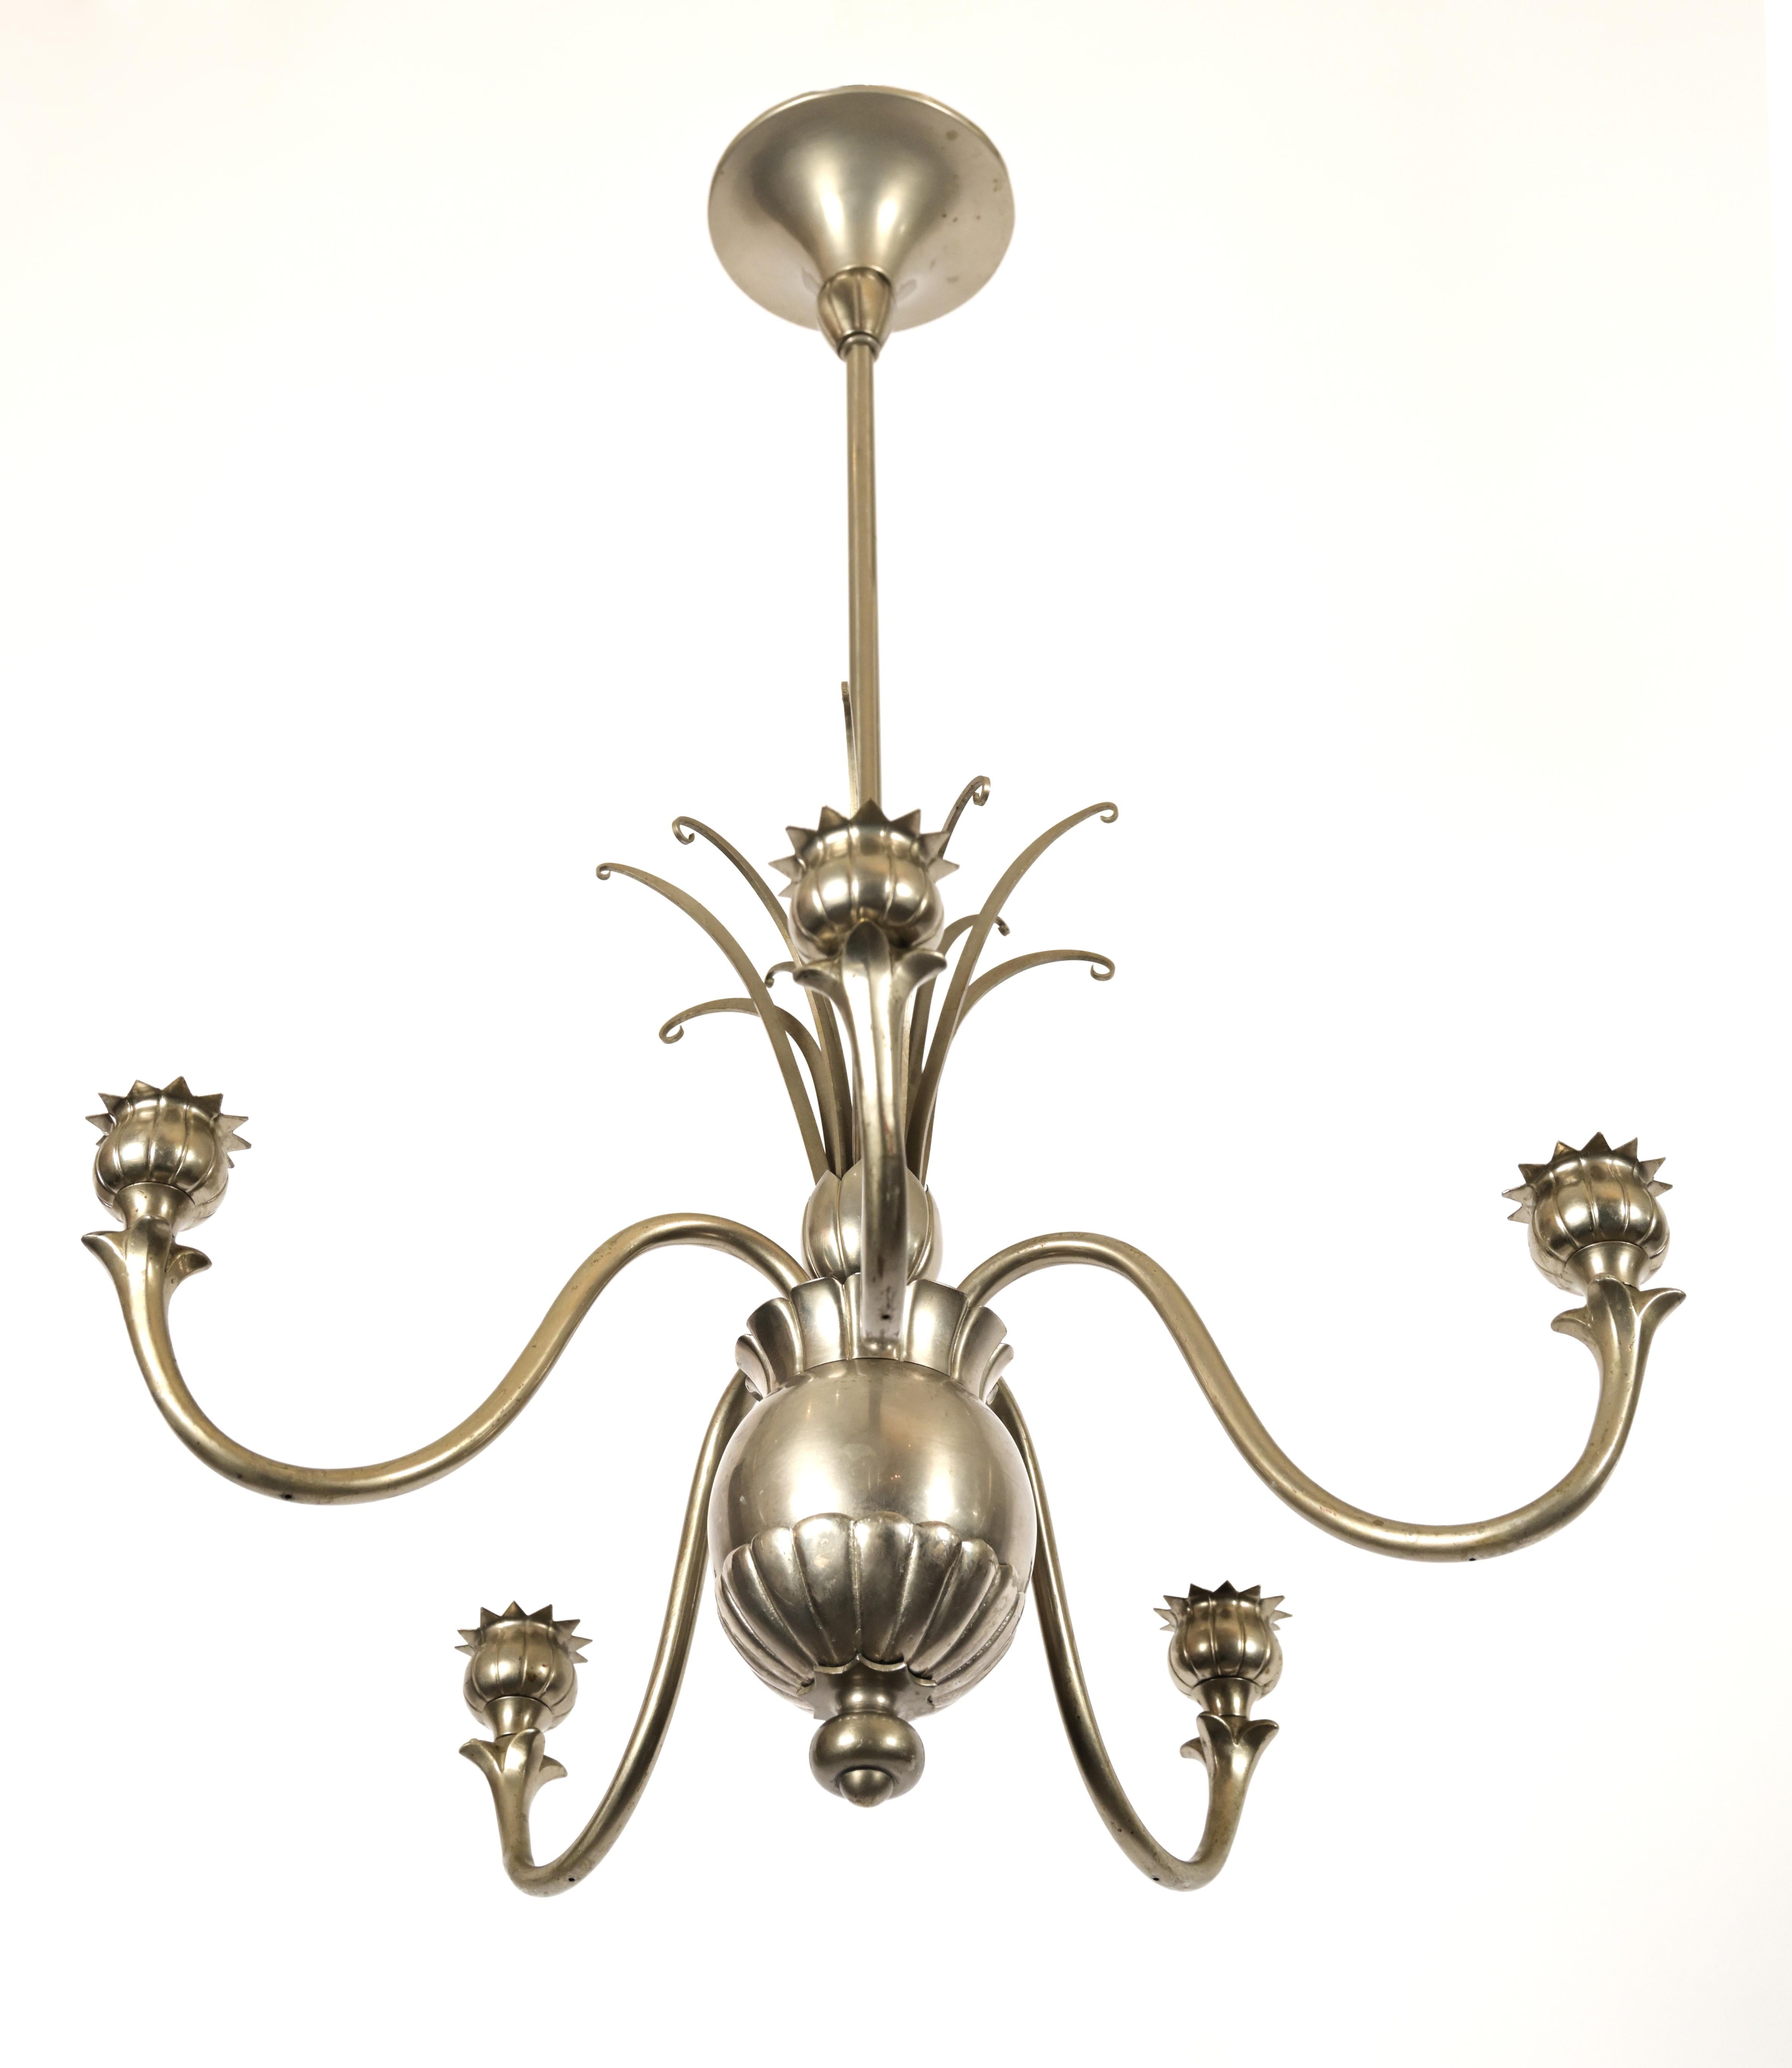 A Swedish Grace Period Tole Pewter chandelier with 5 curved upward arms having spike bulb bases. The center is decorated in a pineapple like manner with an orb center and spiked leafage. Standard wiring included in pricing. 

